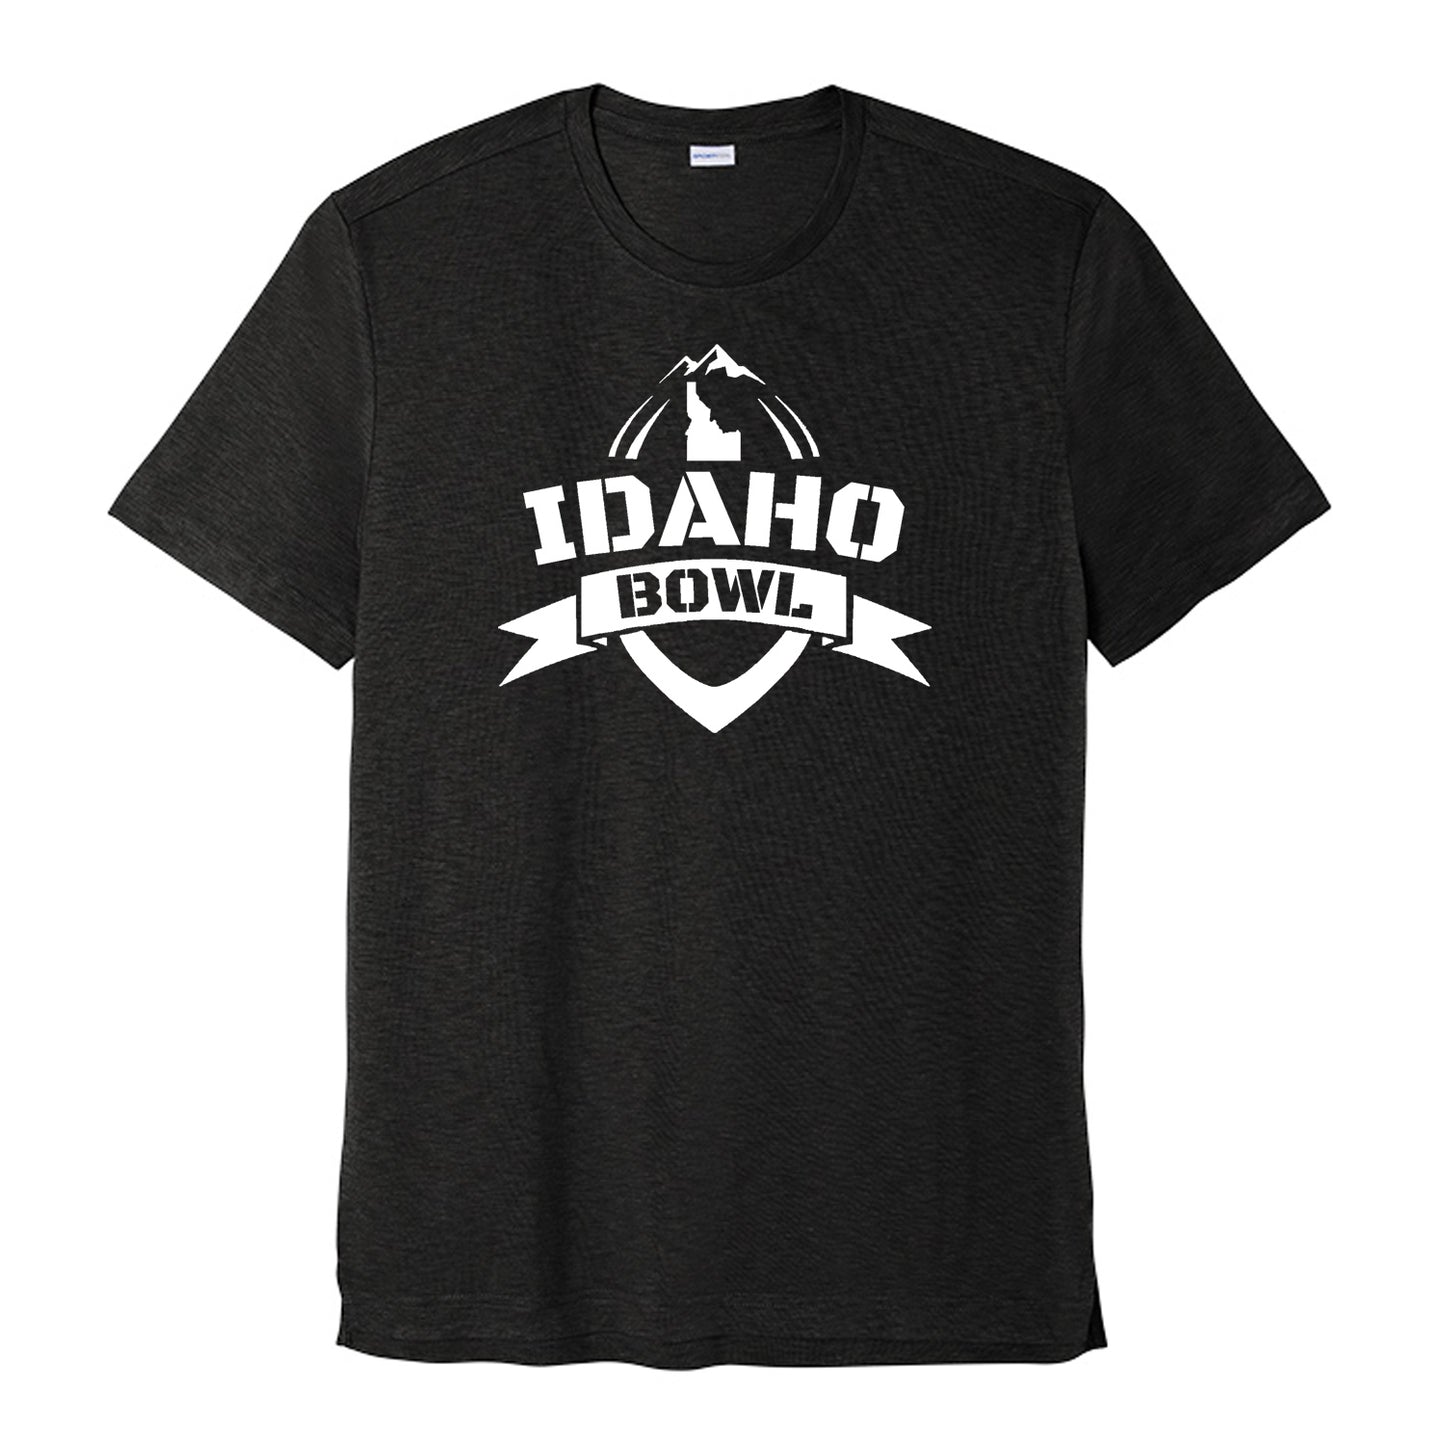 Idaho Bowl - Polyester Blend Tee - 4 colors available